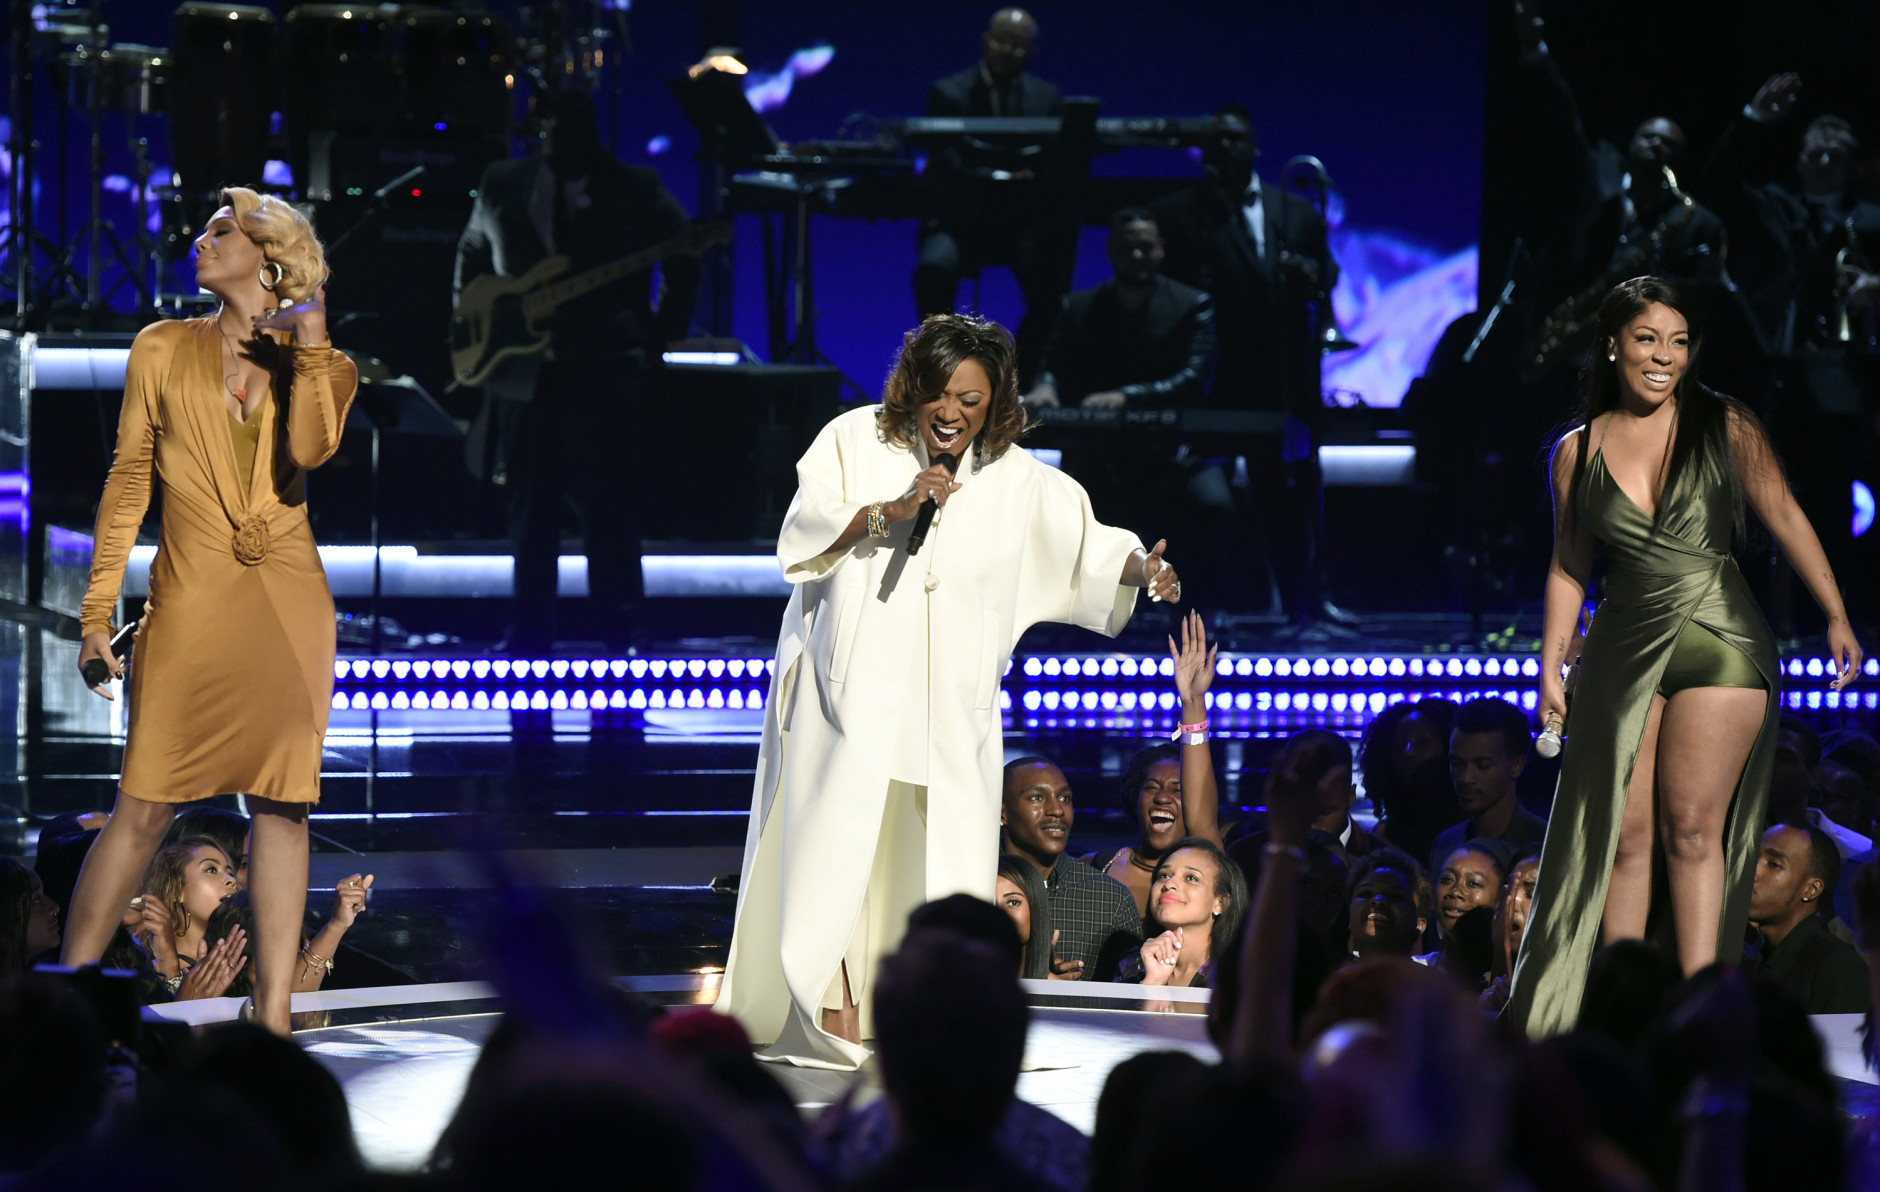 Tamar Braxton, from left, Patti LaBelle, and K. Michelle perform at the BET Awards at the Microsoft Theater on Sunday, June 28, 2015, in Los Angeles. (Photo by Chris Pizzello/Invision/AP)